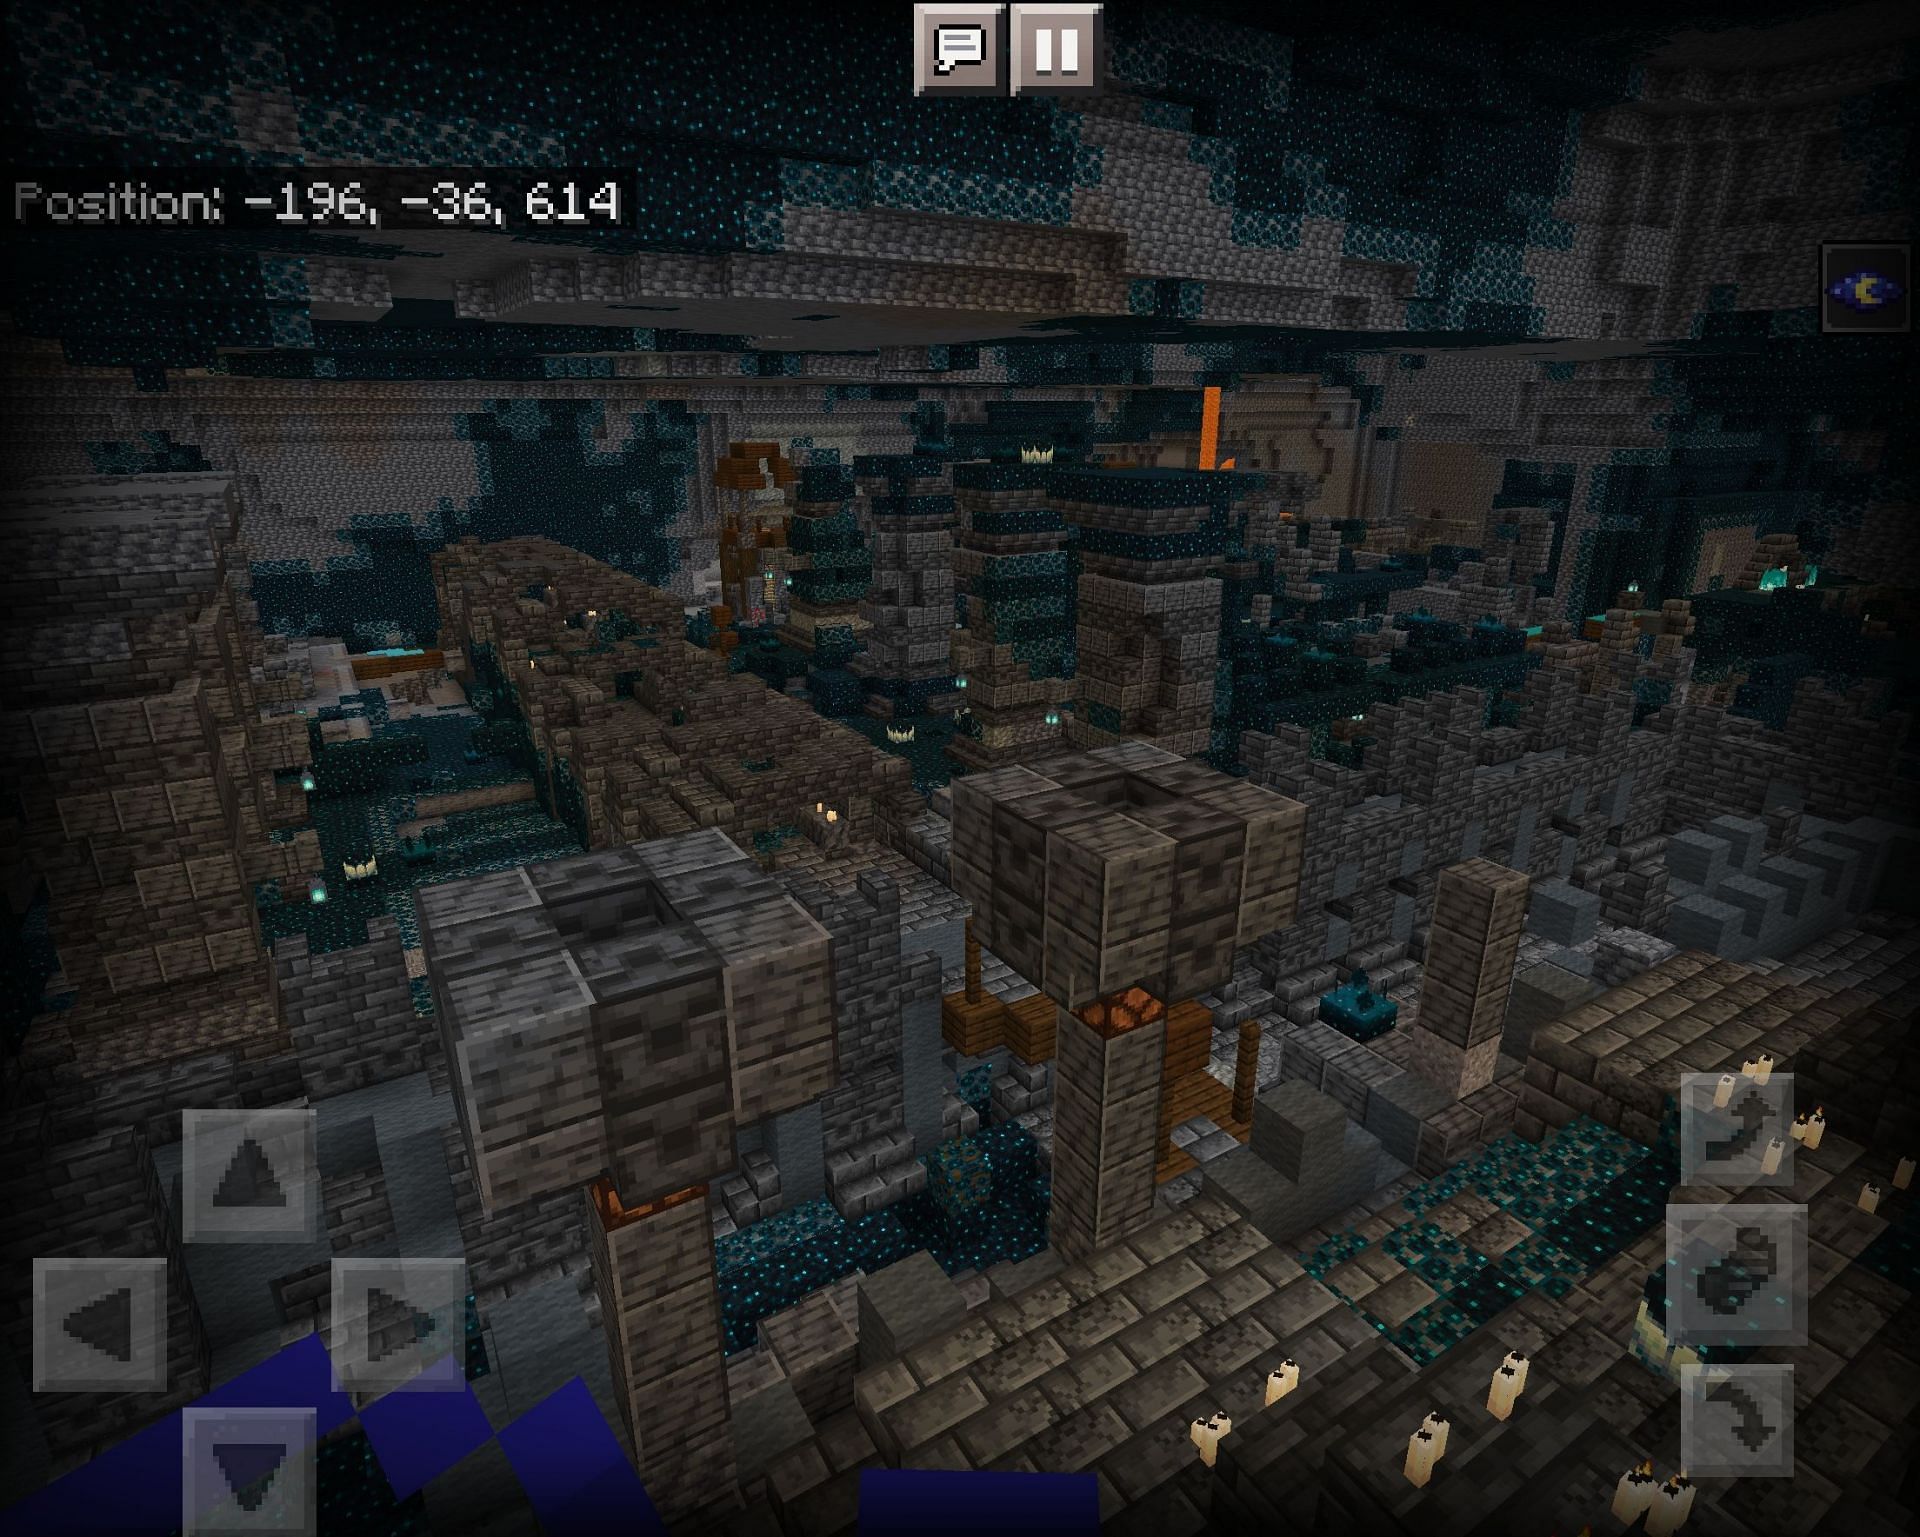 One of the ancient cities found in the world (Image via Minecraft)